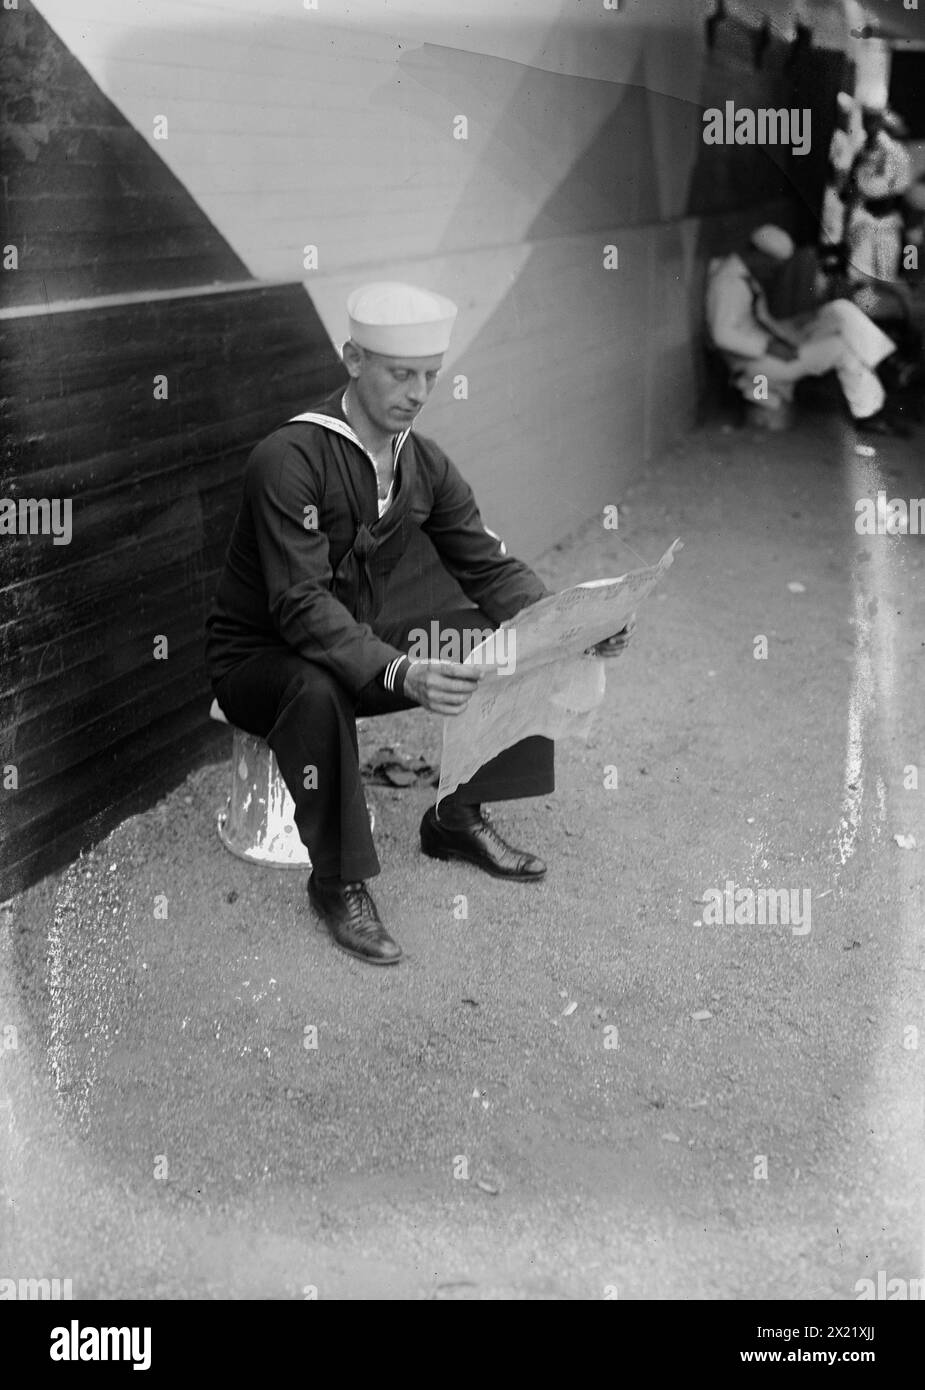 W.J. Reilly, 1917 or 1918. William J. Reilly, sergeant in the Navy and vaudeville performer, who recorded patriotic songs as &quot;Sailor Reilly&quot;. He is on the USS Recruit, a wooden mockup of a battleship built in Union Square, New York City by the Navy to recruit seamen and sell Liberty Bonds during World War I. Stock Photo